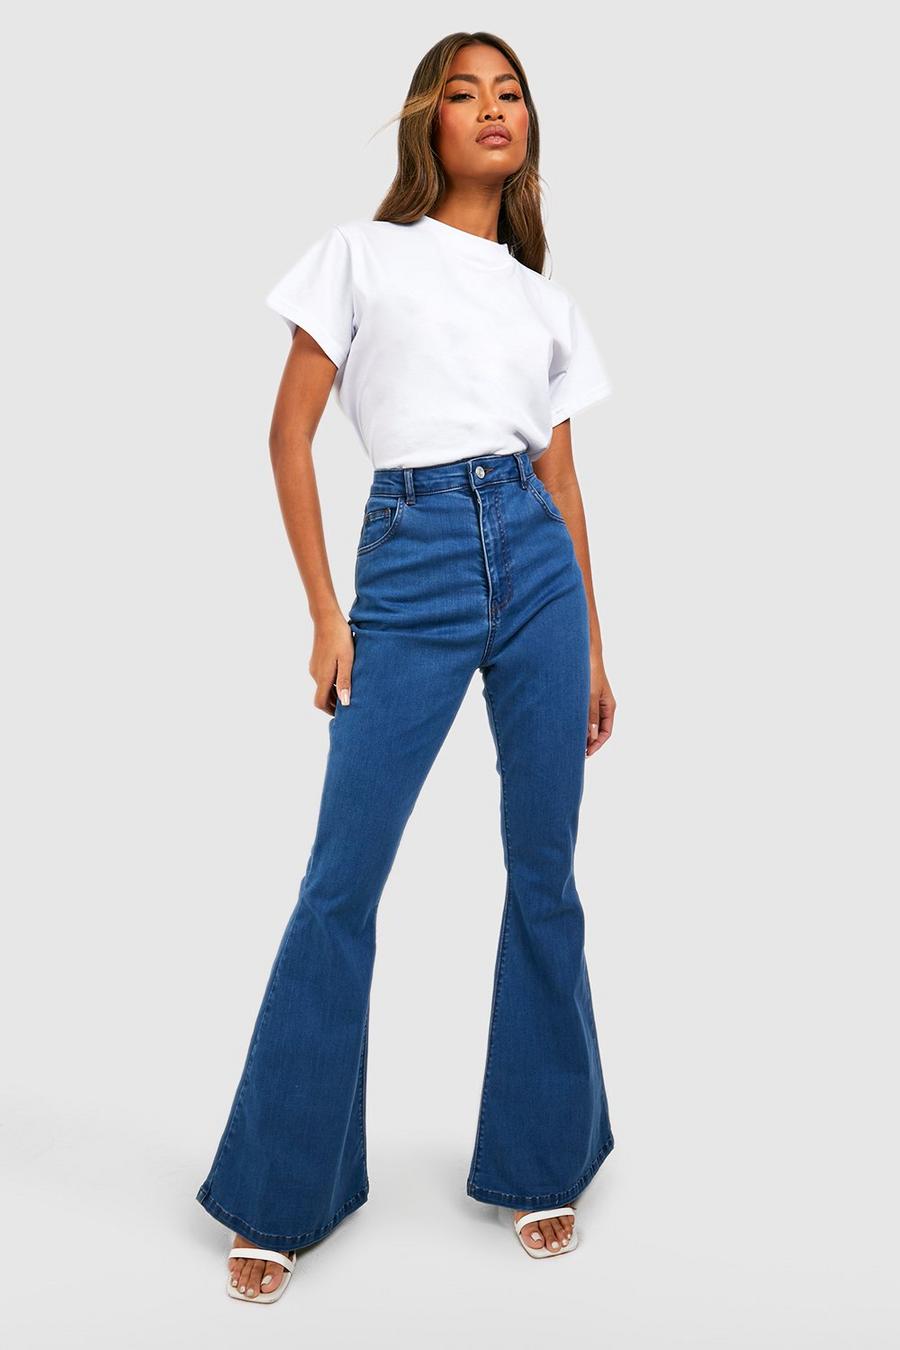 New Look 70s high waist flared jeans in mid blue